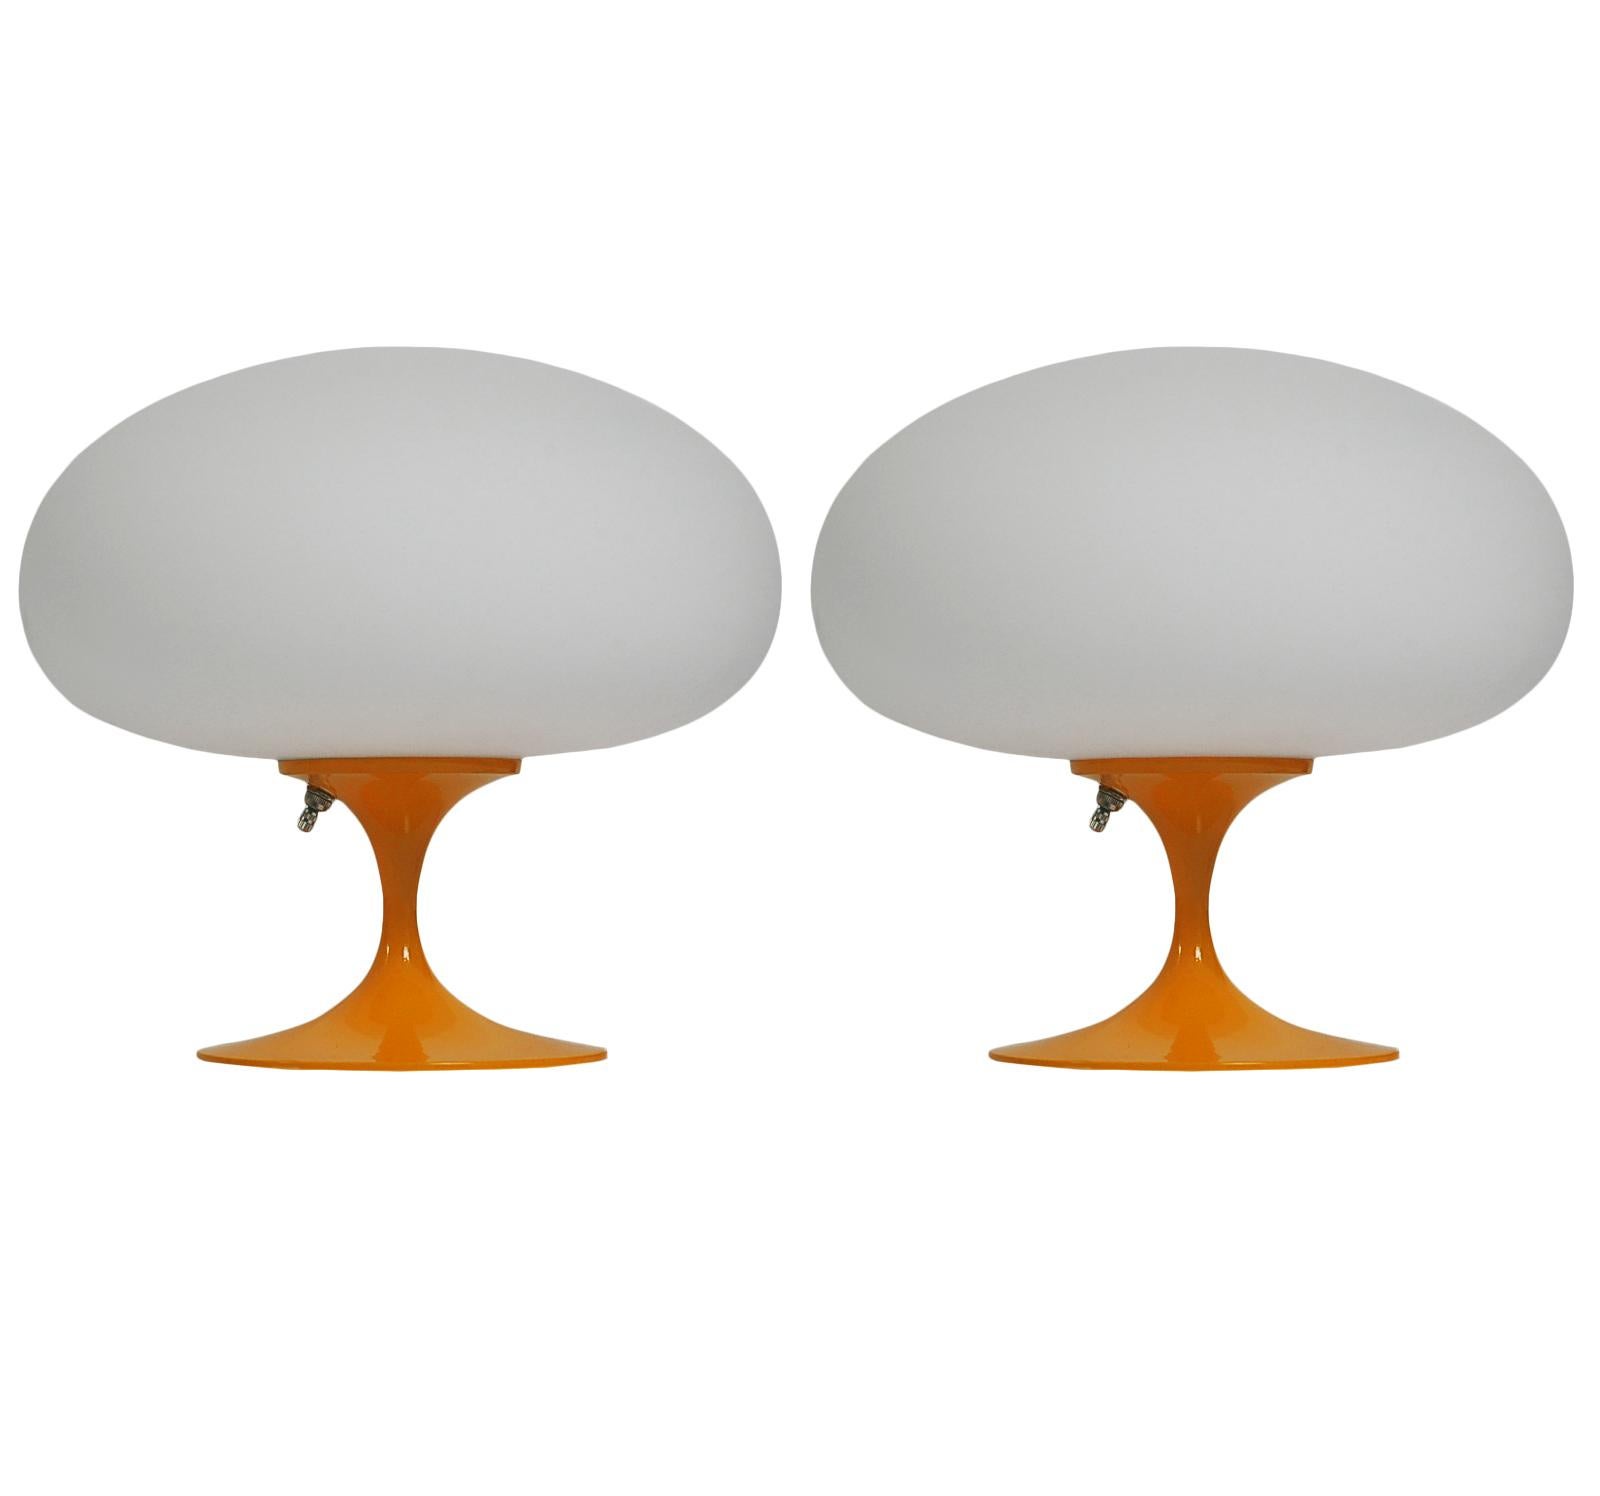 A gorgeous matching pair of tulip form table lamps after Laurel Lamp Company These feature an orange powder coated cast aluminum bases with mouth blown frosted white glass shades. The price includes the pair as shown.